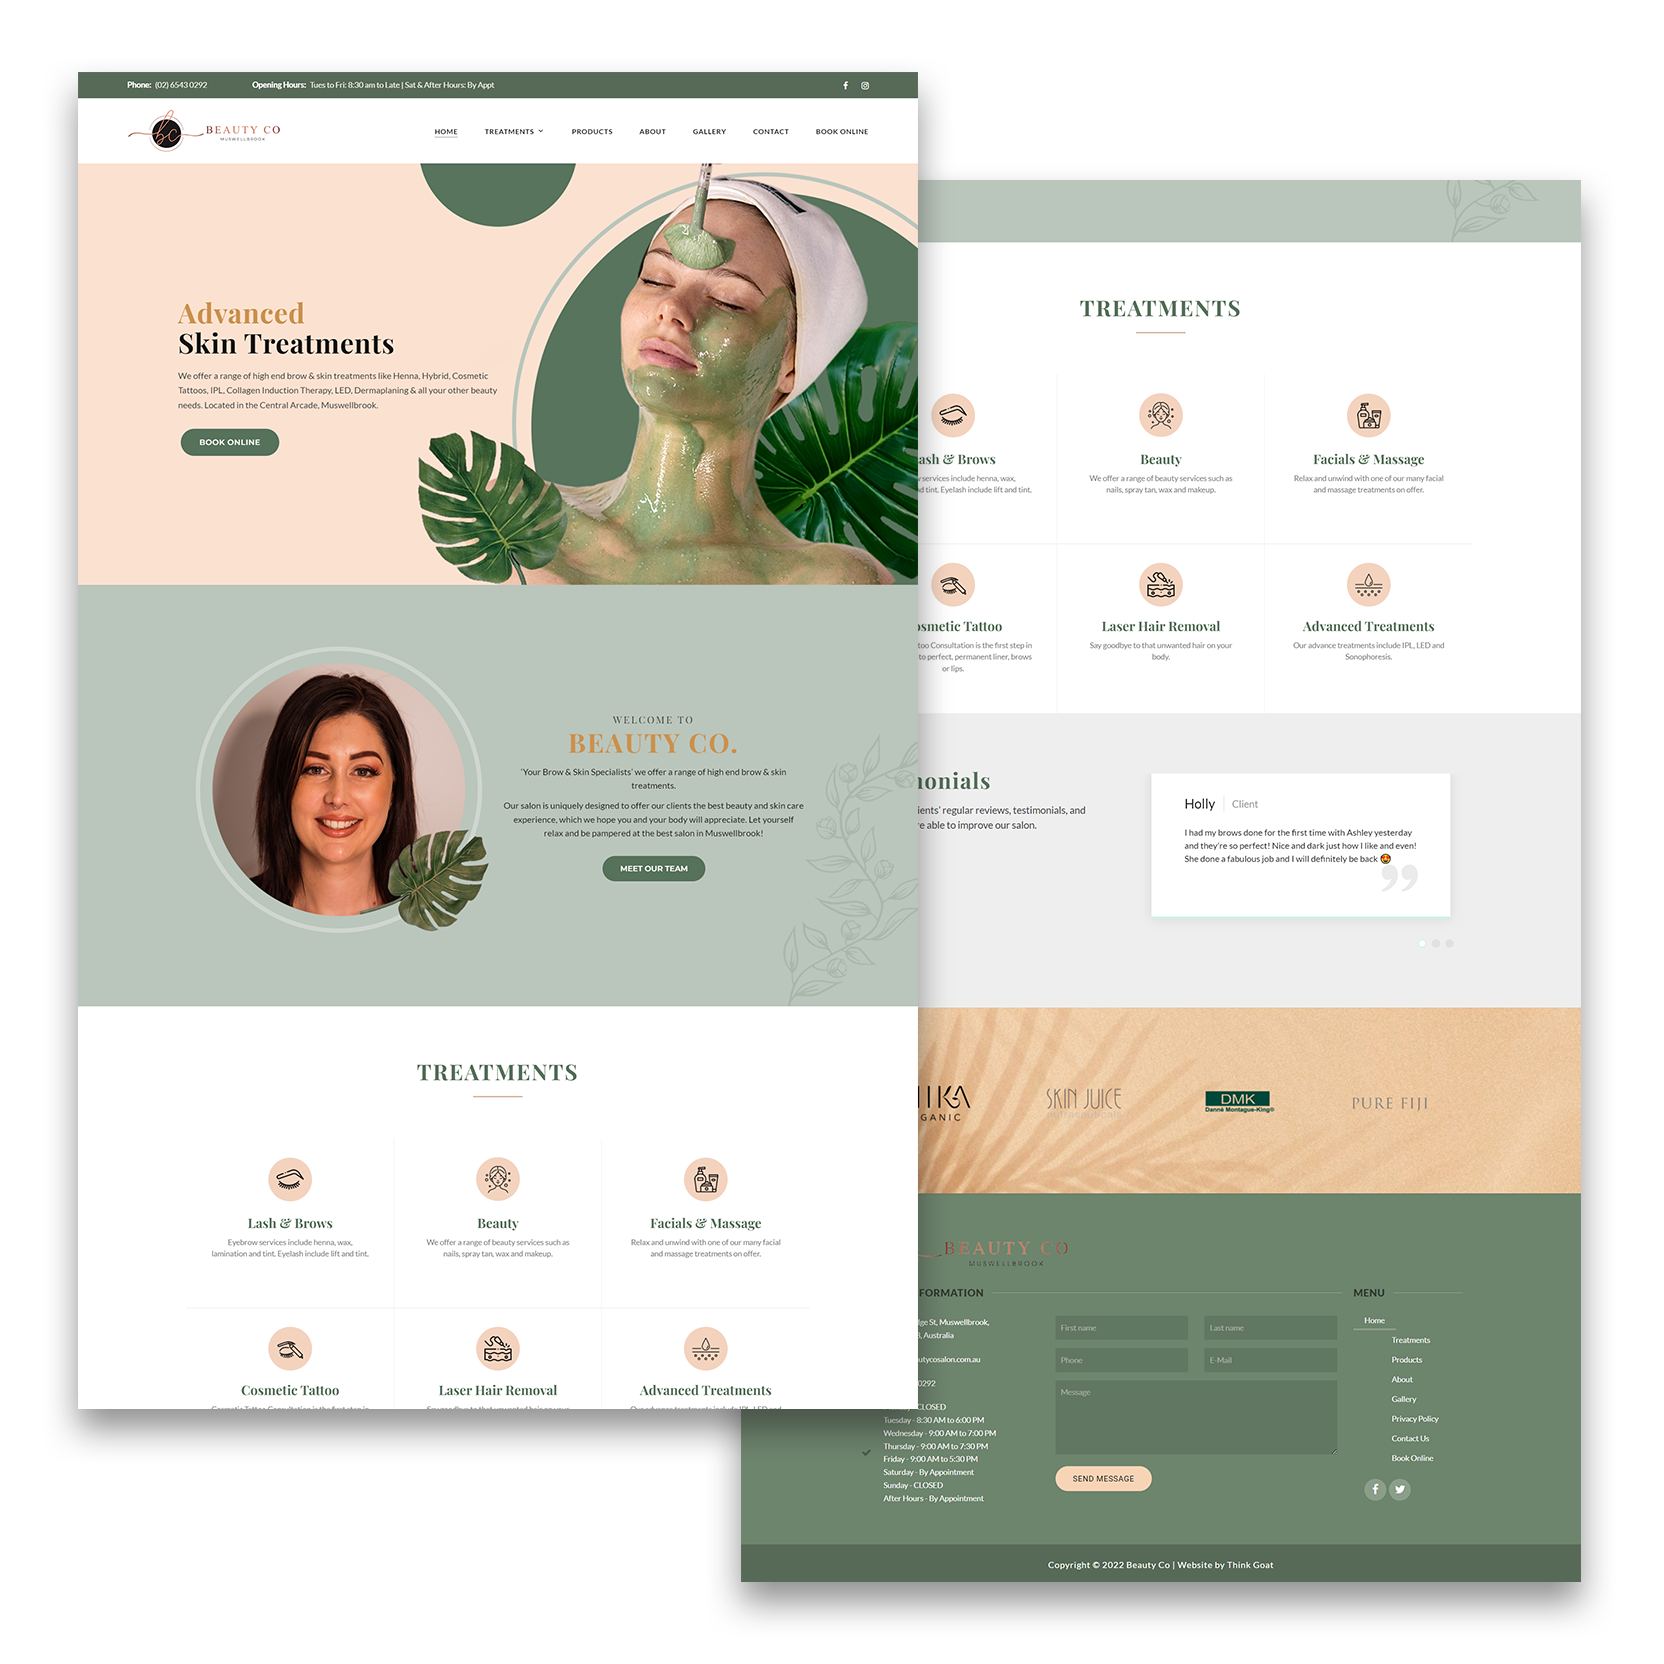 Beauty Co Website design by Think Goat